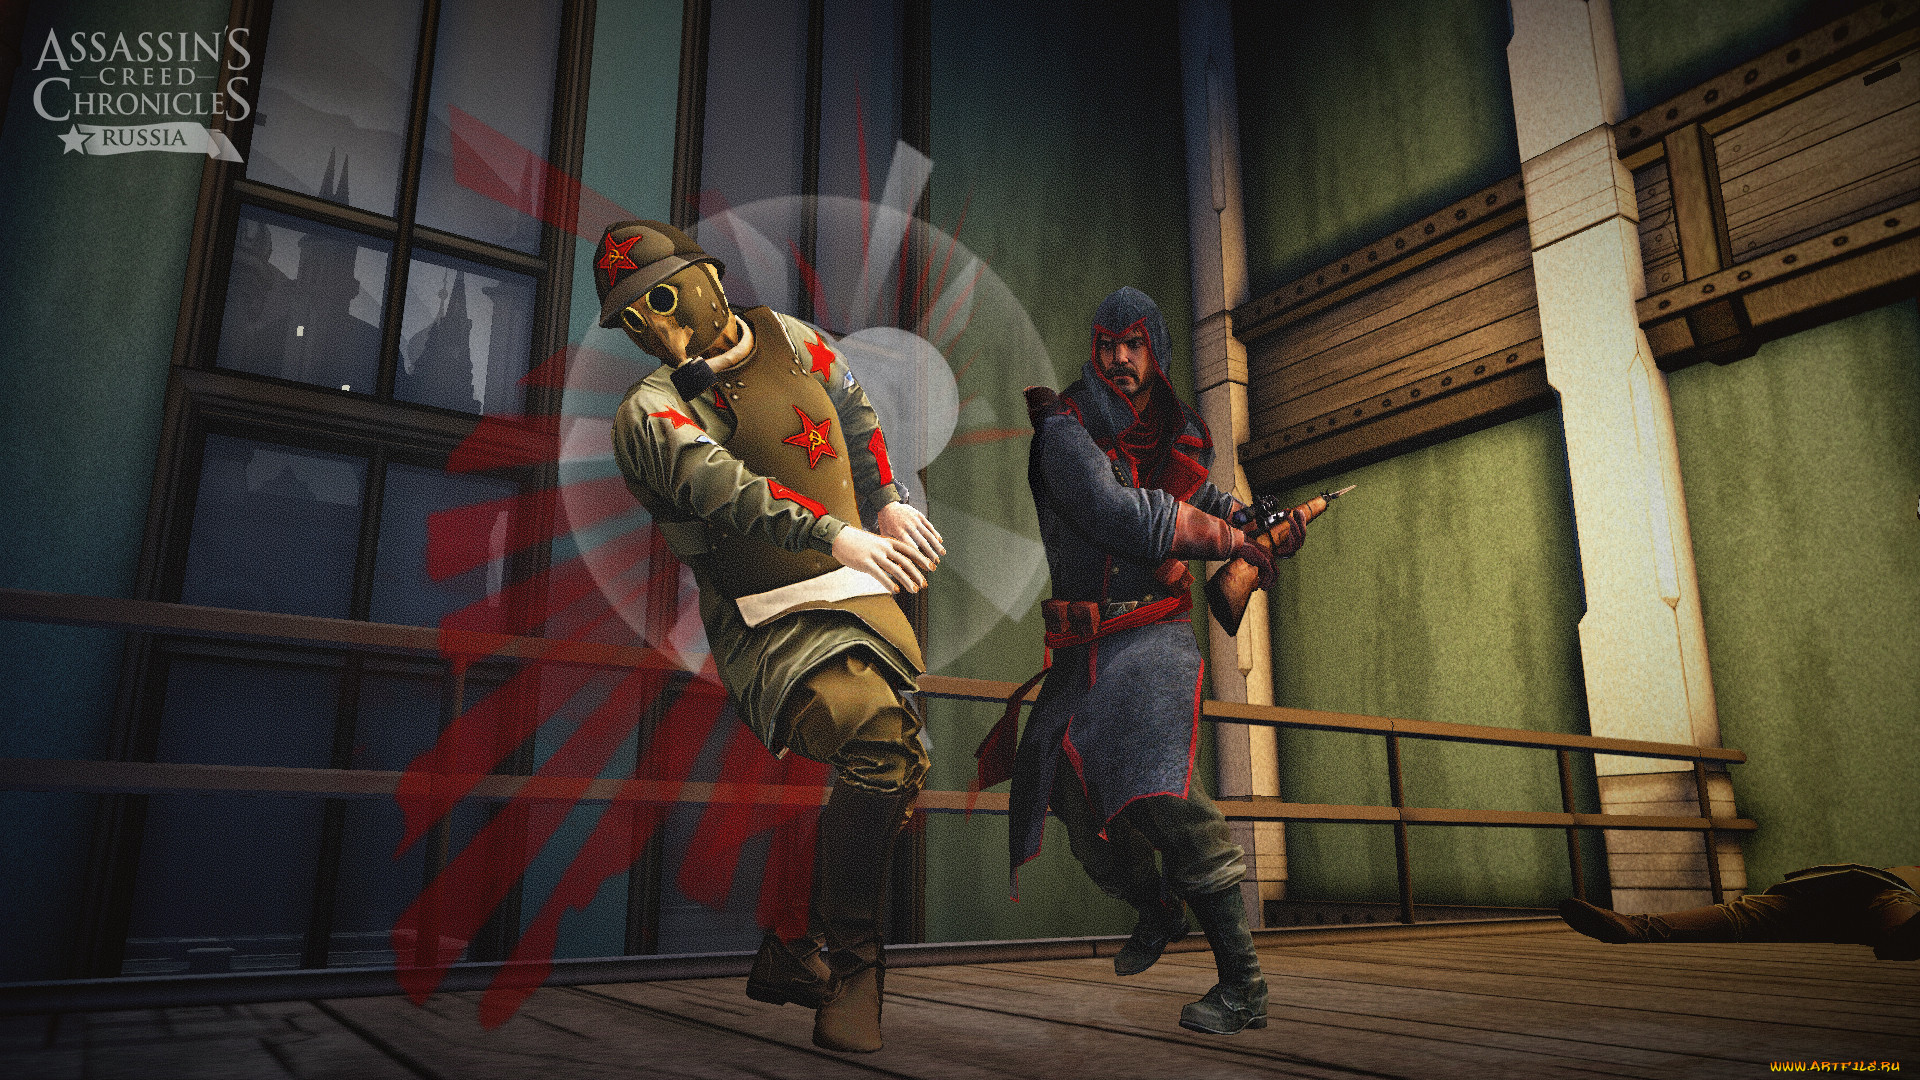 assassin`s creed chronicles,  russia,  , russia, , action, assassin's, creed, chronicles